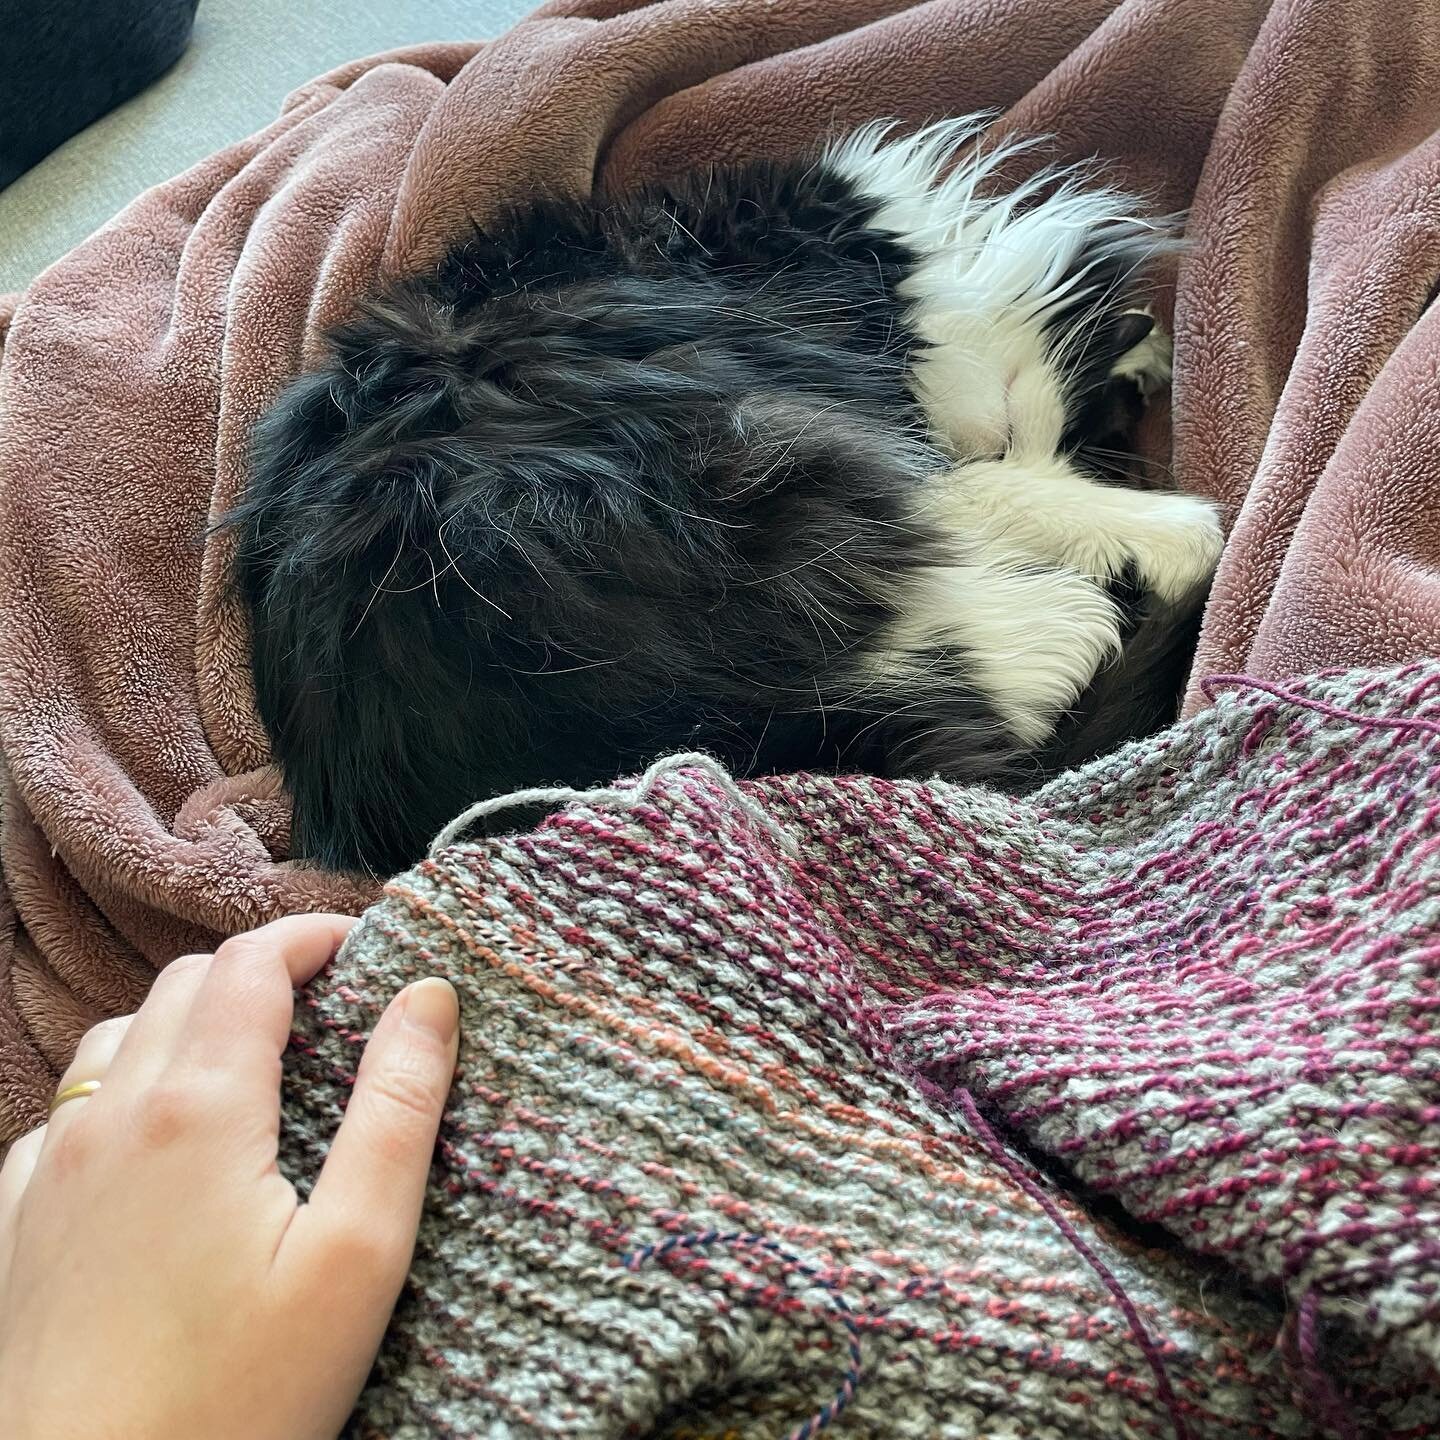 Cozy and sewing in ends with my sweet bean after a migraine night 😴
.
.
.
{Description: A black and white tuxedo cat is curled into a ball on top of a raspberry blanket. In the foreground of the photo is Lizzy&rsquo;s hand holding the wrong side of 